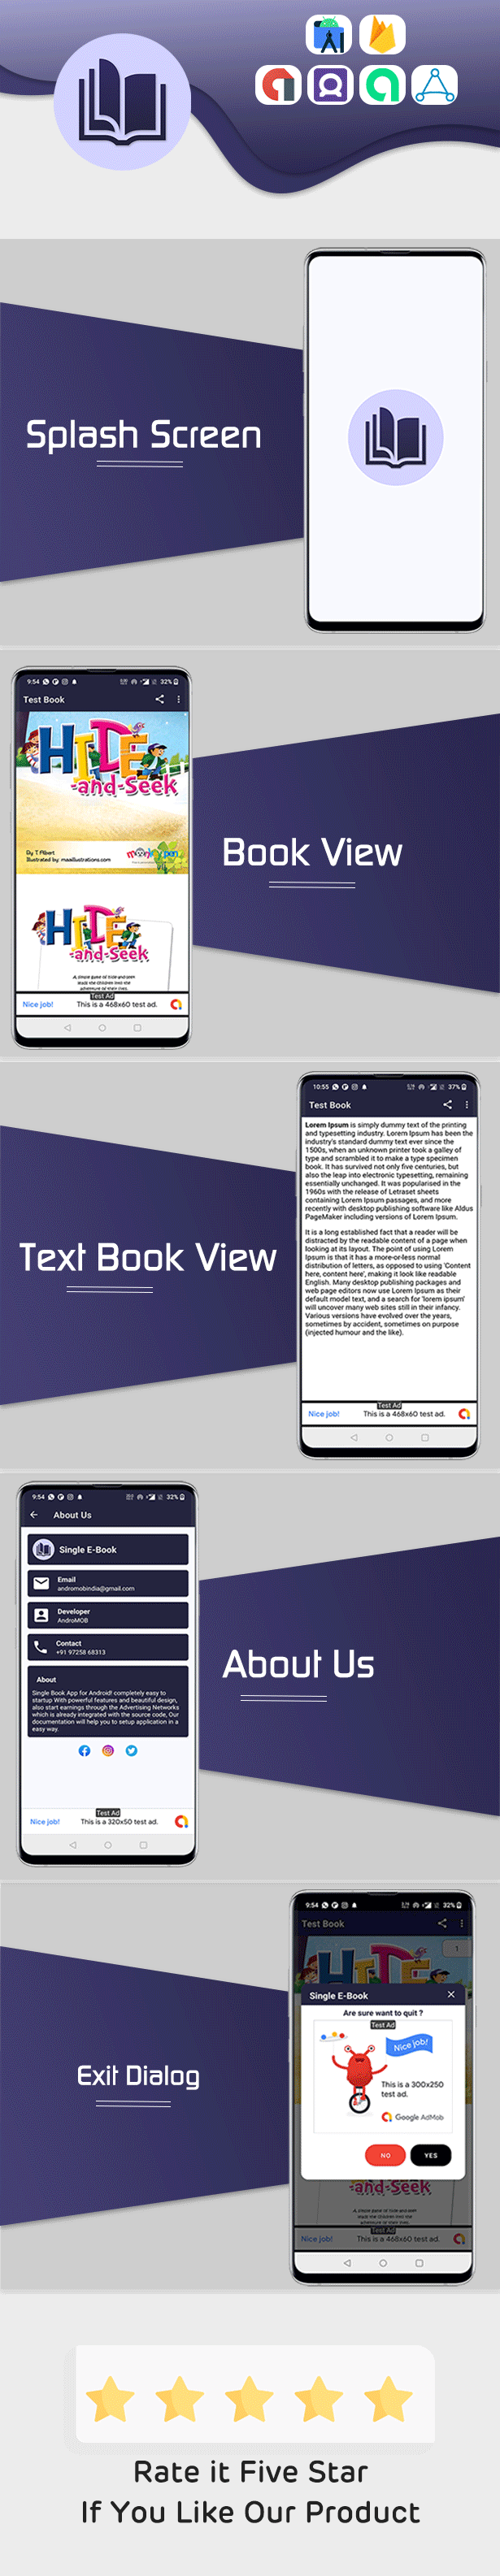 Single E Book App - Text or Pdf With Admin Panel - 1